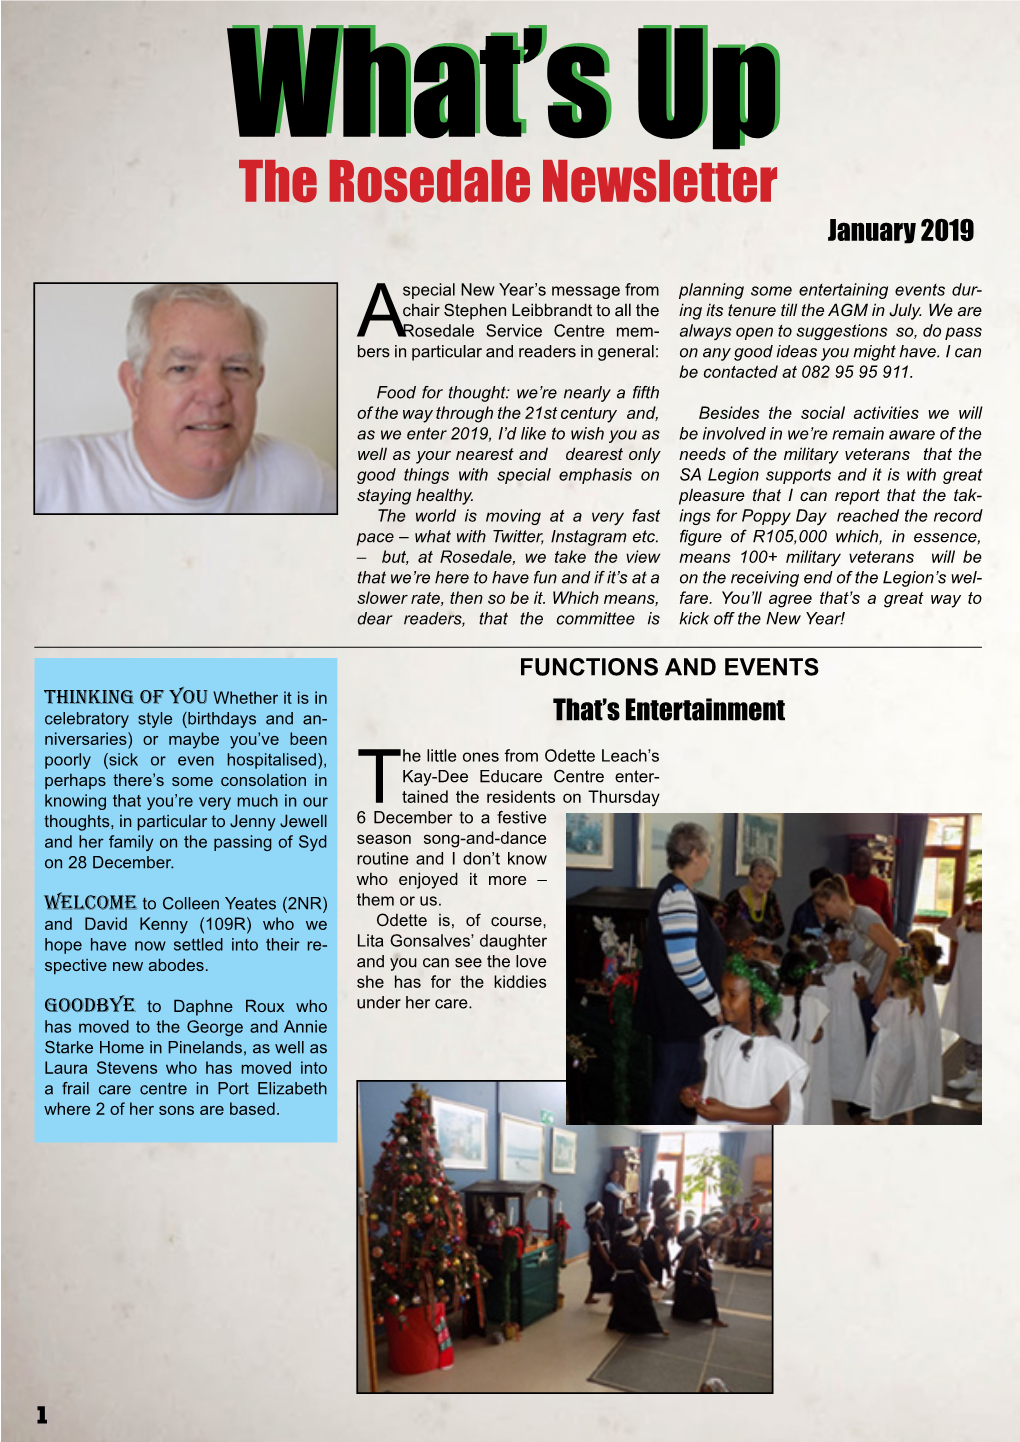 What's up the Rosedale Newsletter